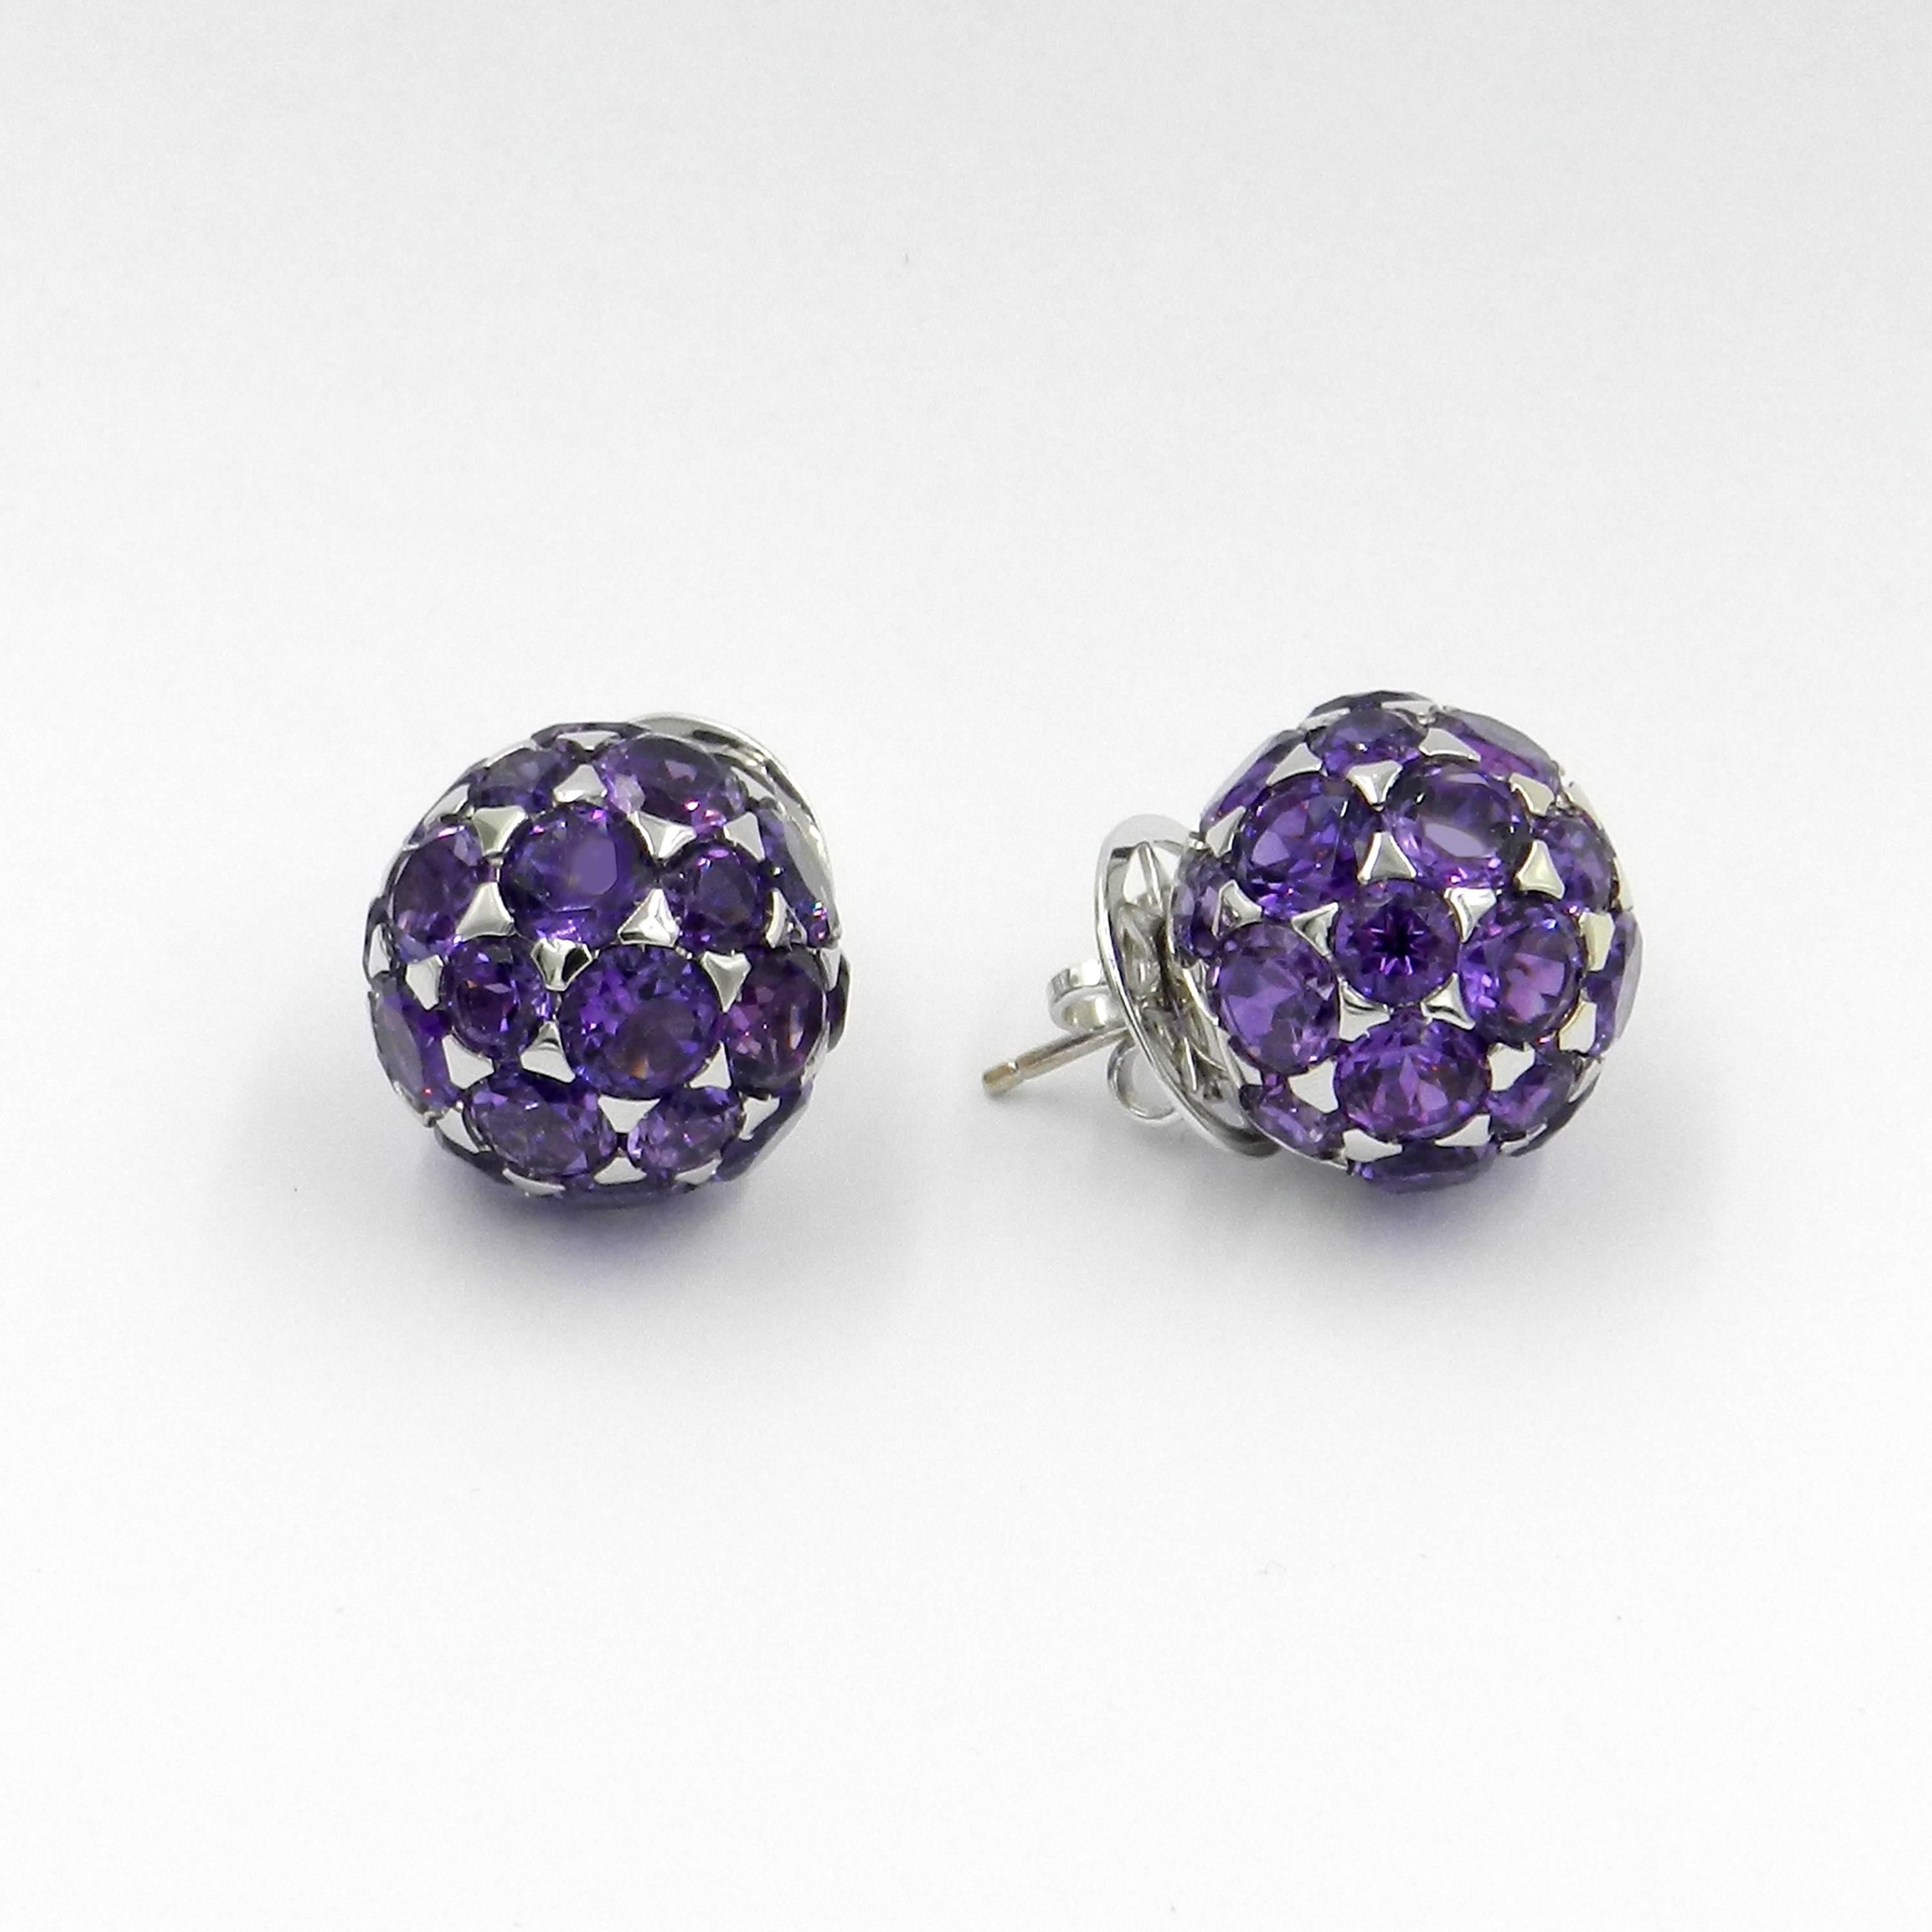 18 Karat White Gold Amethysts Garavelli Boule Earrings. 
It's an exquisite craftsmanship that leaves darkened gold triangles among the amethysts.
Boules diameter mm 16
18kt GOLD  : 9,00
Amethysts  ct :19.05